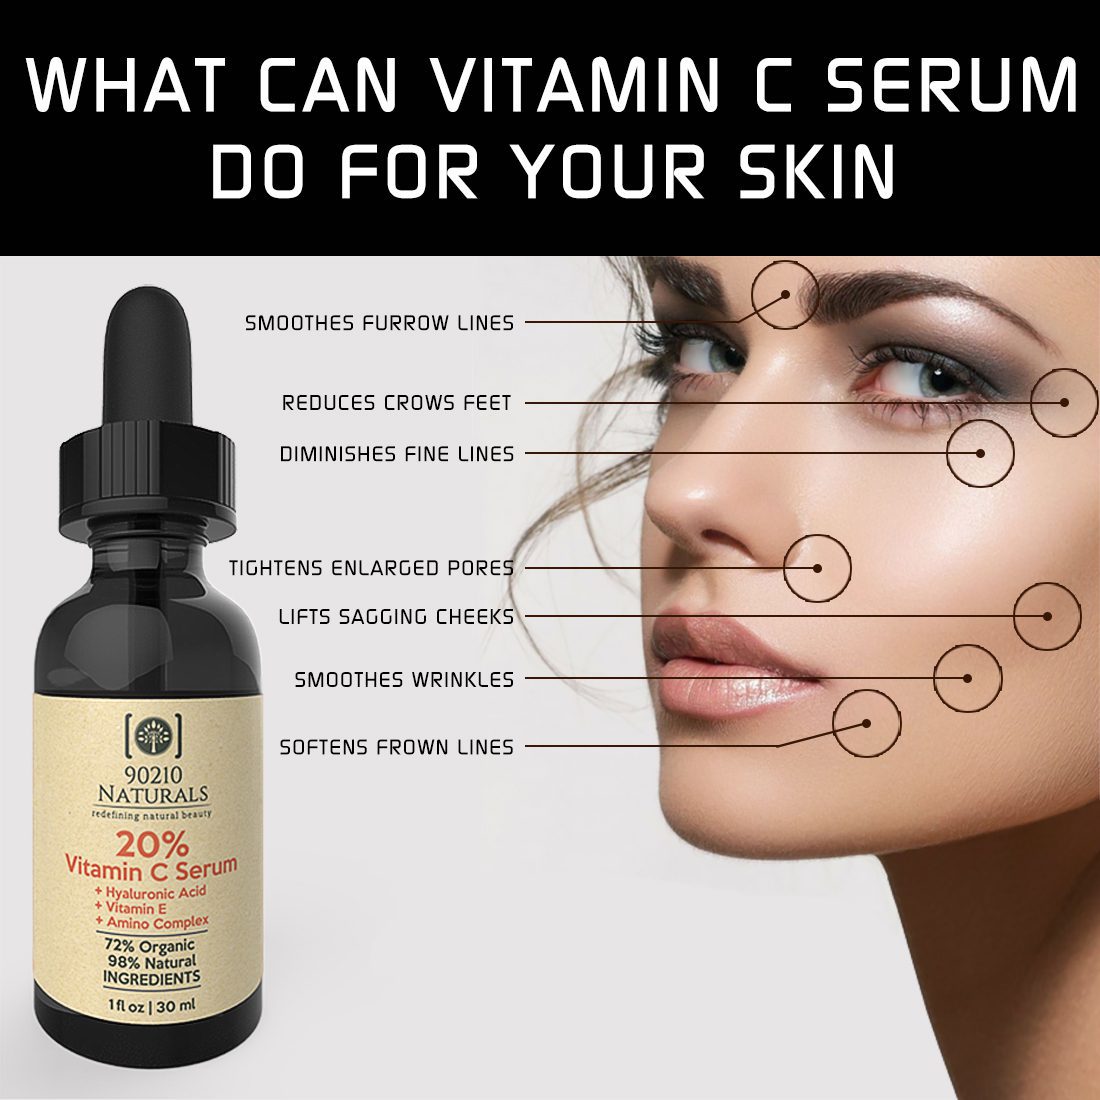 What Does Vitamin C And E Do For Your Skin